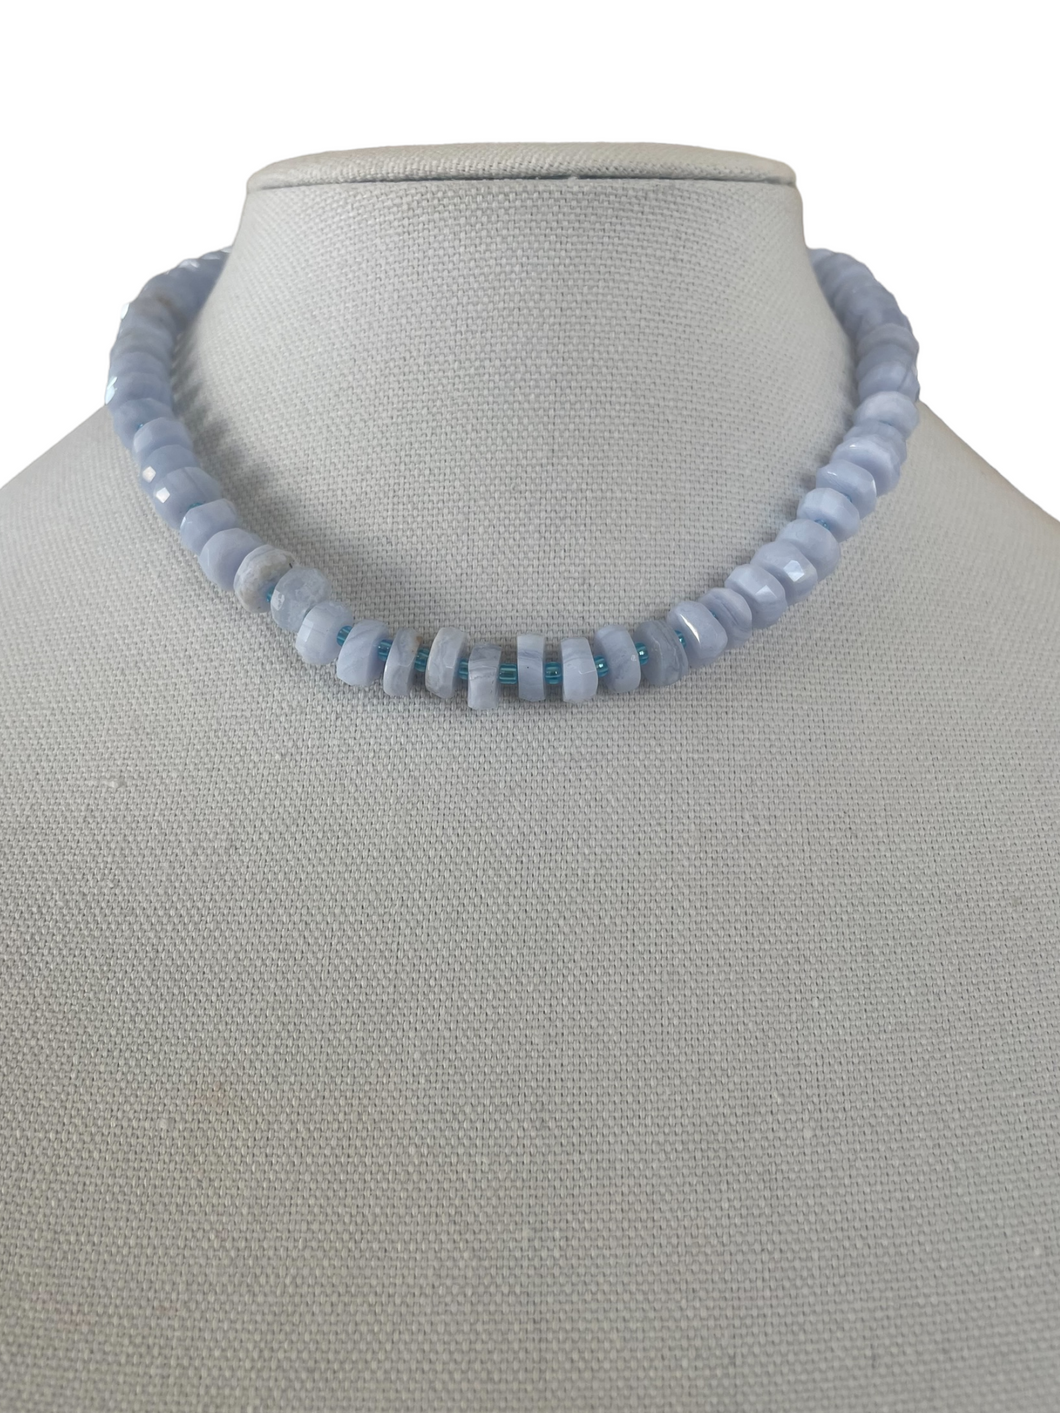 Blue Lace Agate Lariat Necklace - Bloom Jewelry